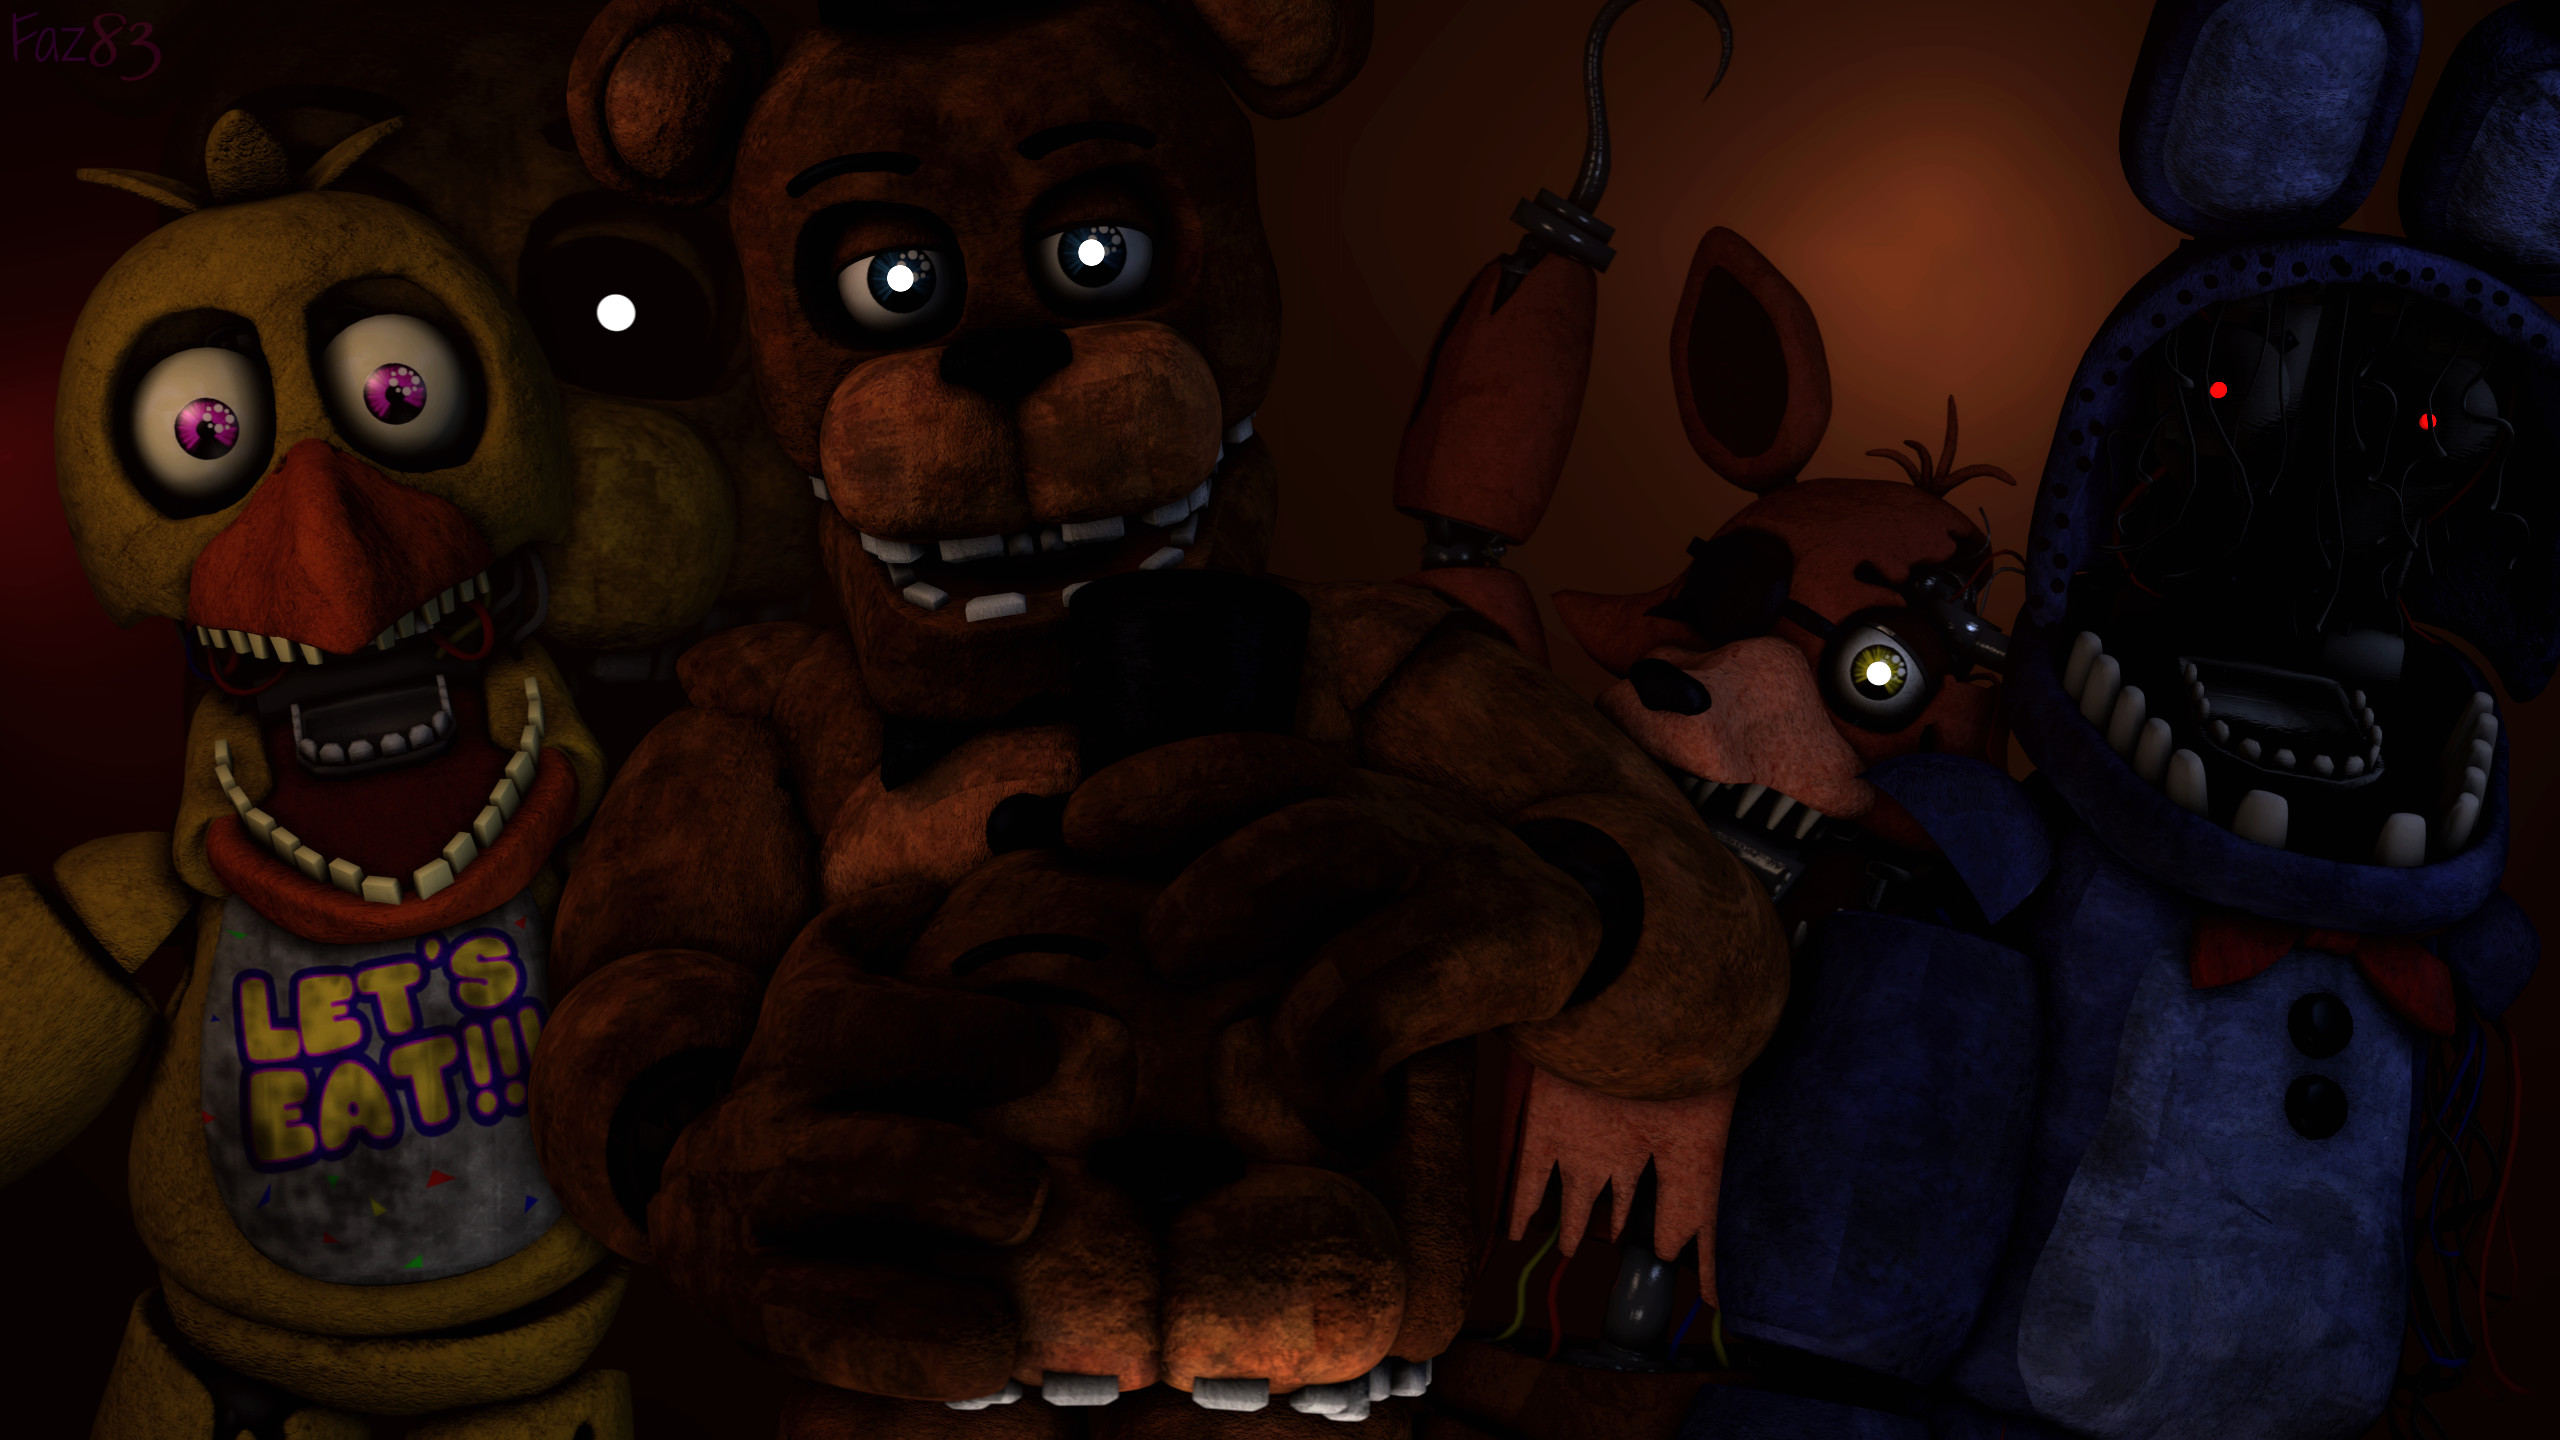 2560x1440 ... (SFM/FNAF 2/Wallpaper) The withered gang by Fazband83